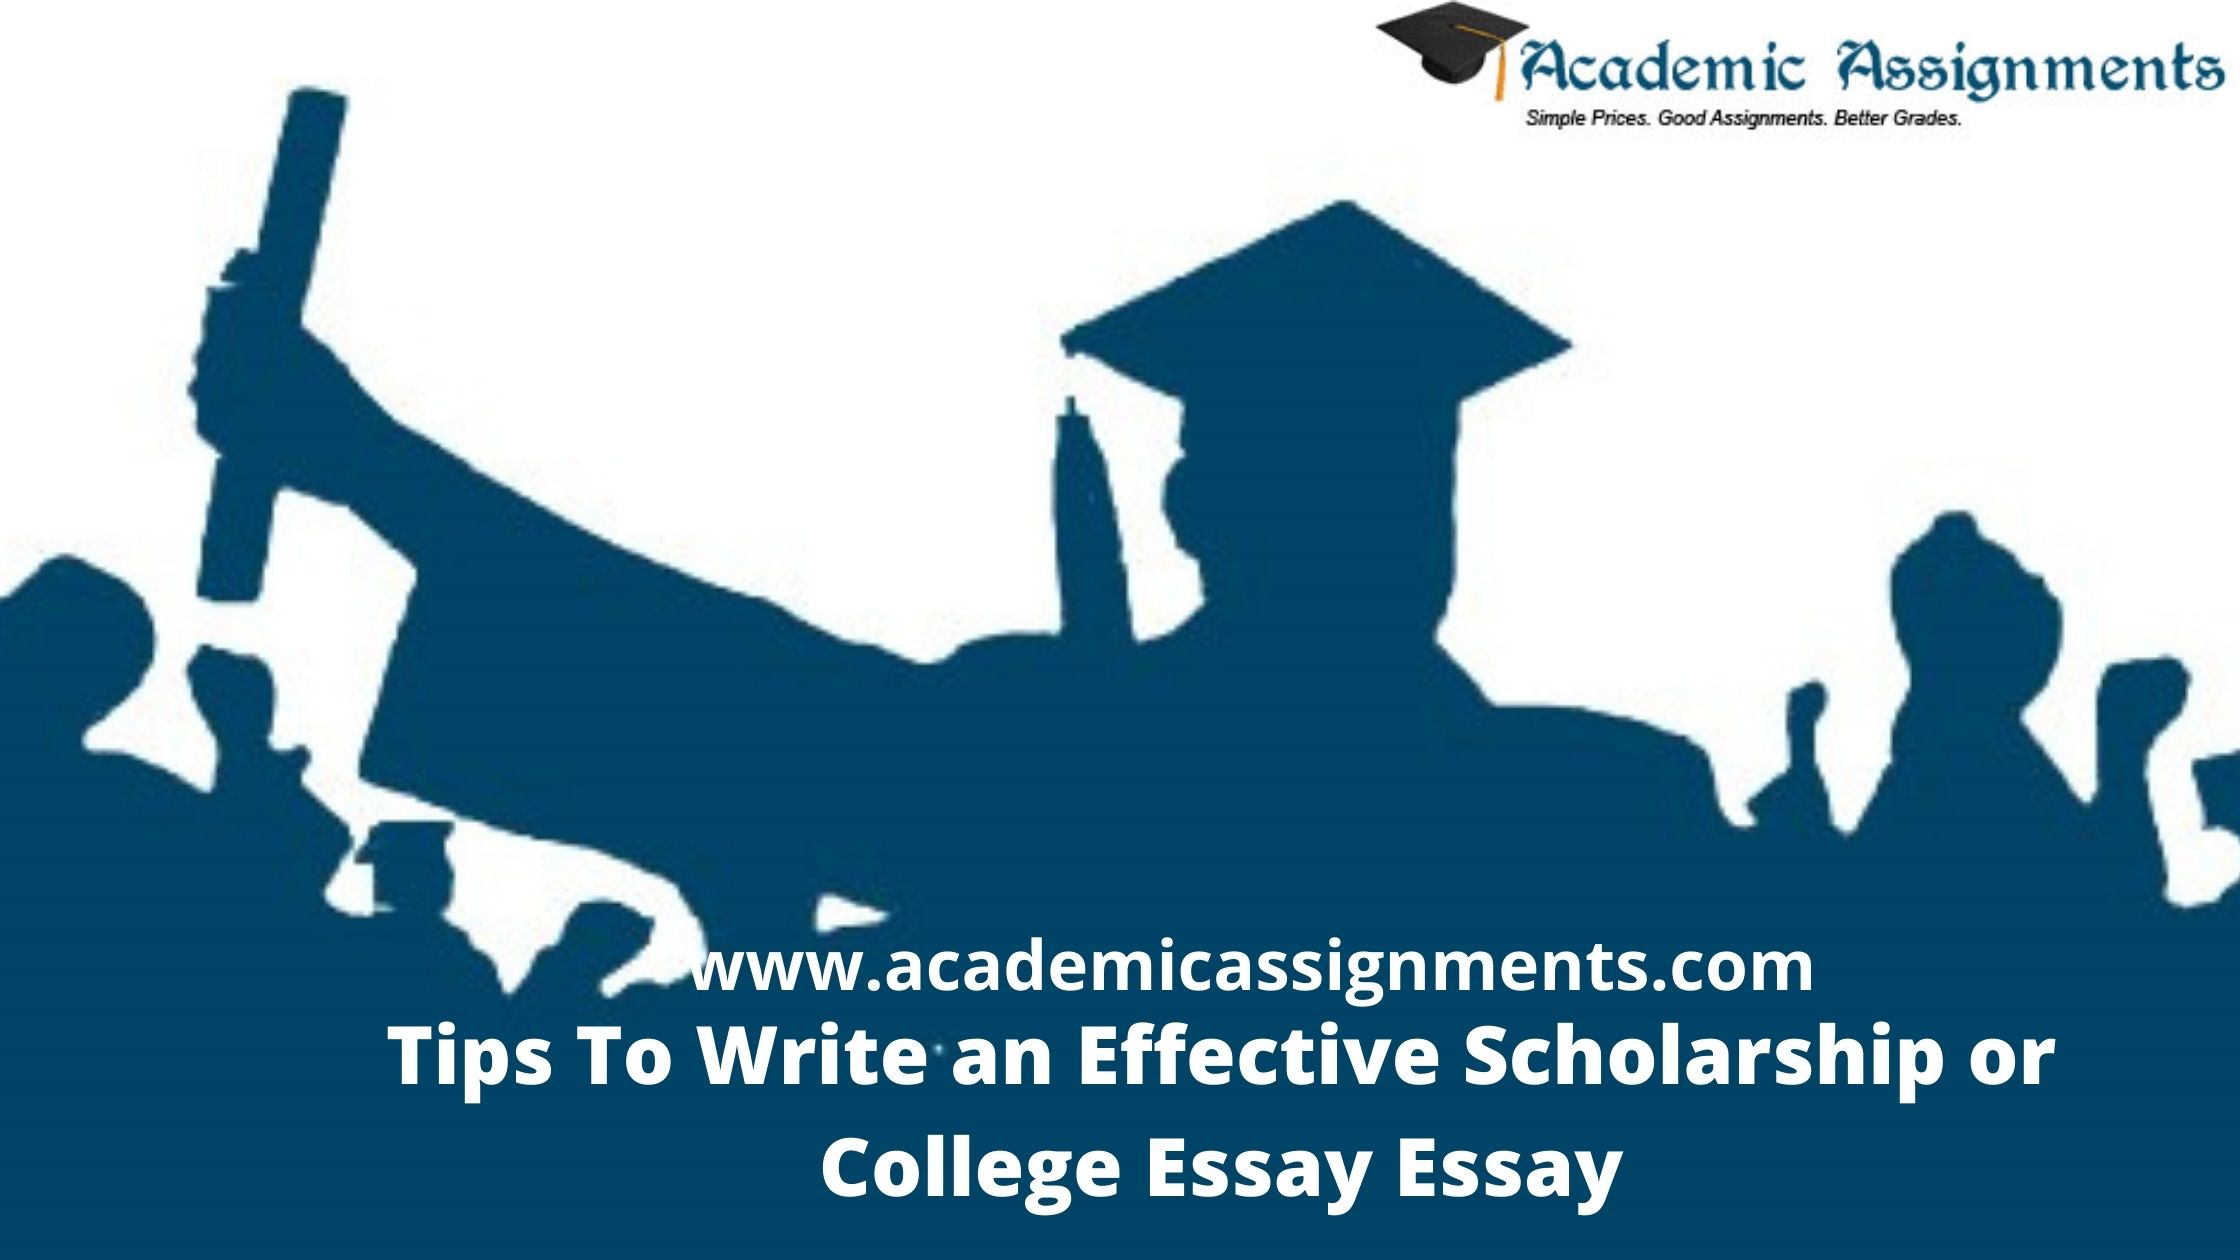 Tips To Write an Effective Scholarship or College Essay